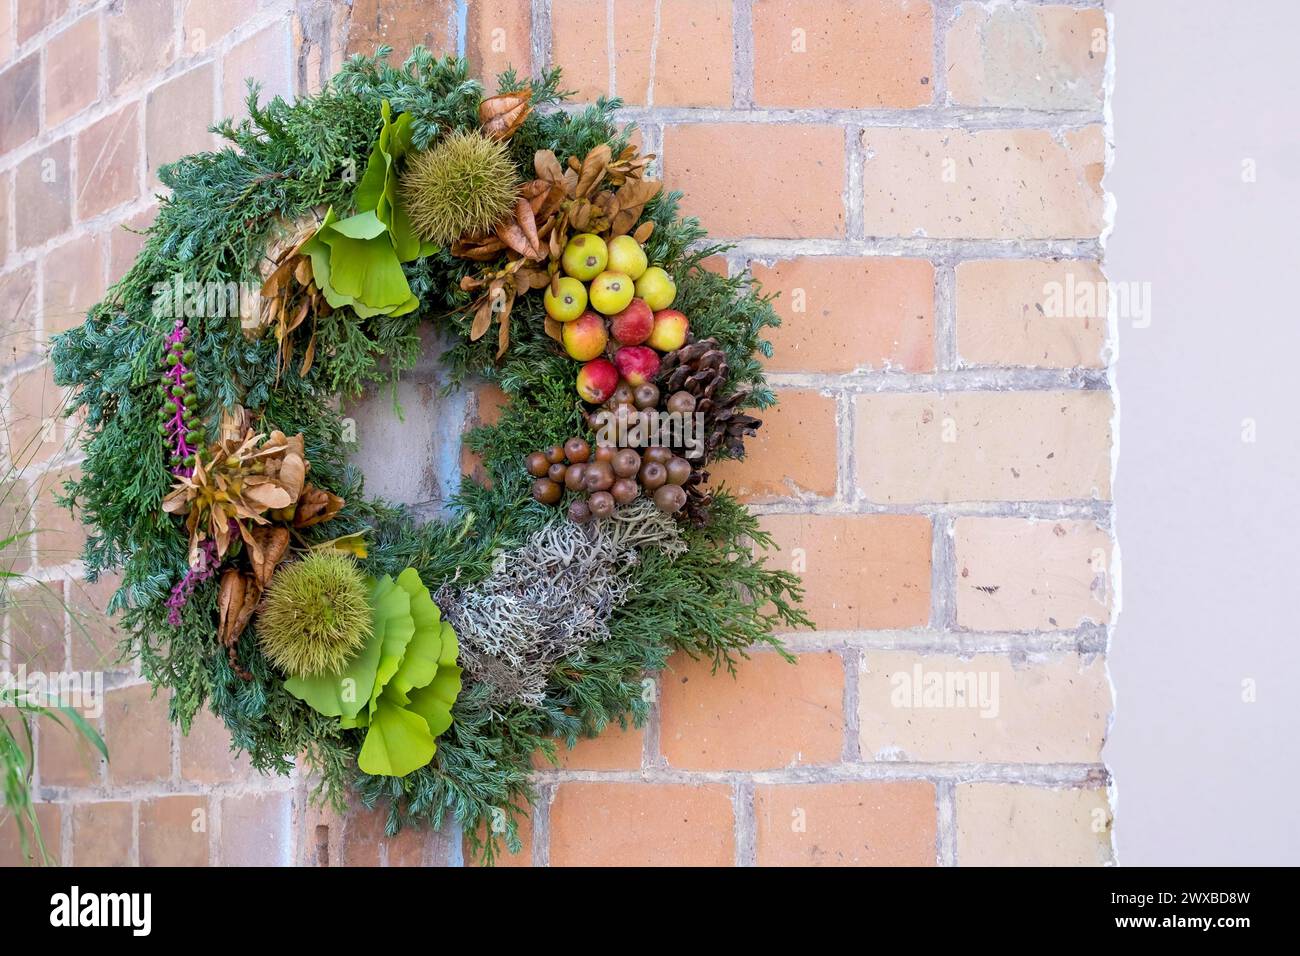 Door wreath made of natural materials in front of a house wall, Rhineland-Palatinate, Germany Stock Photo